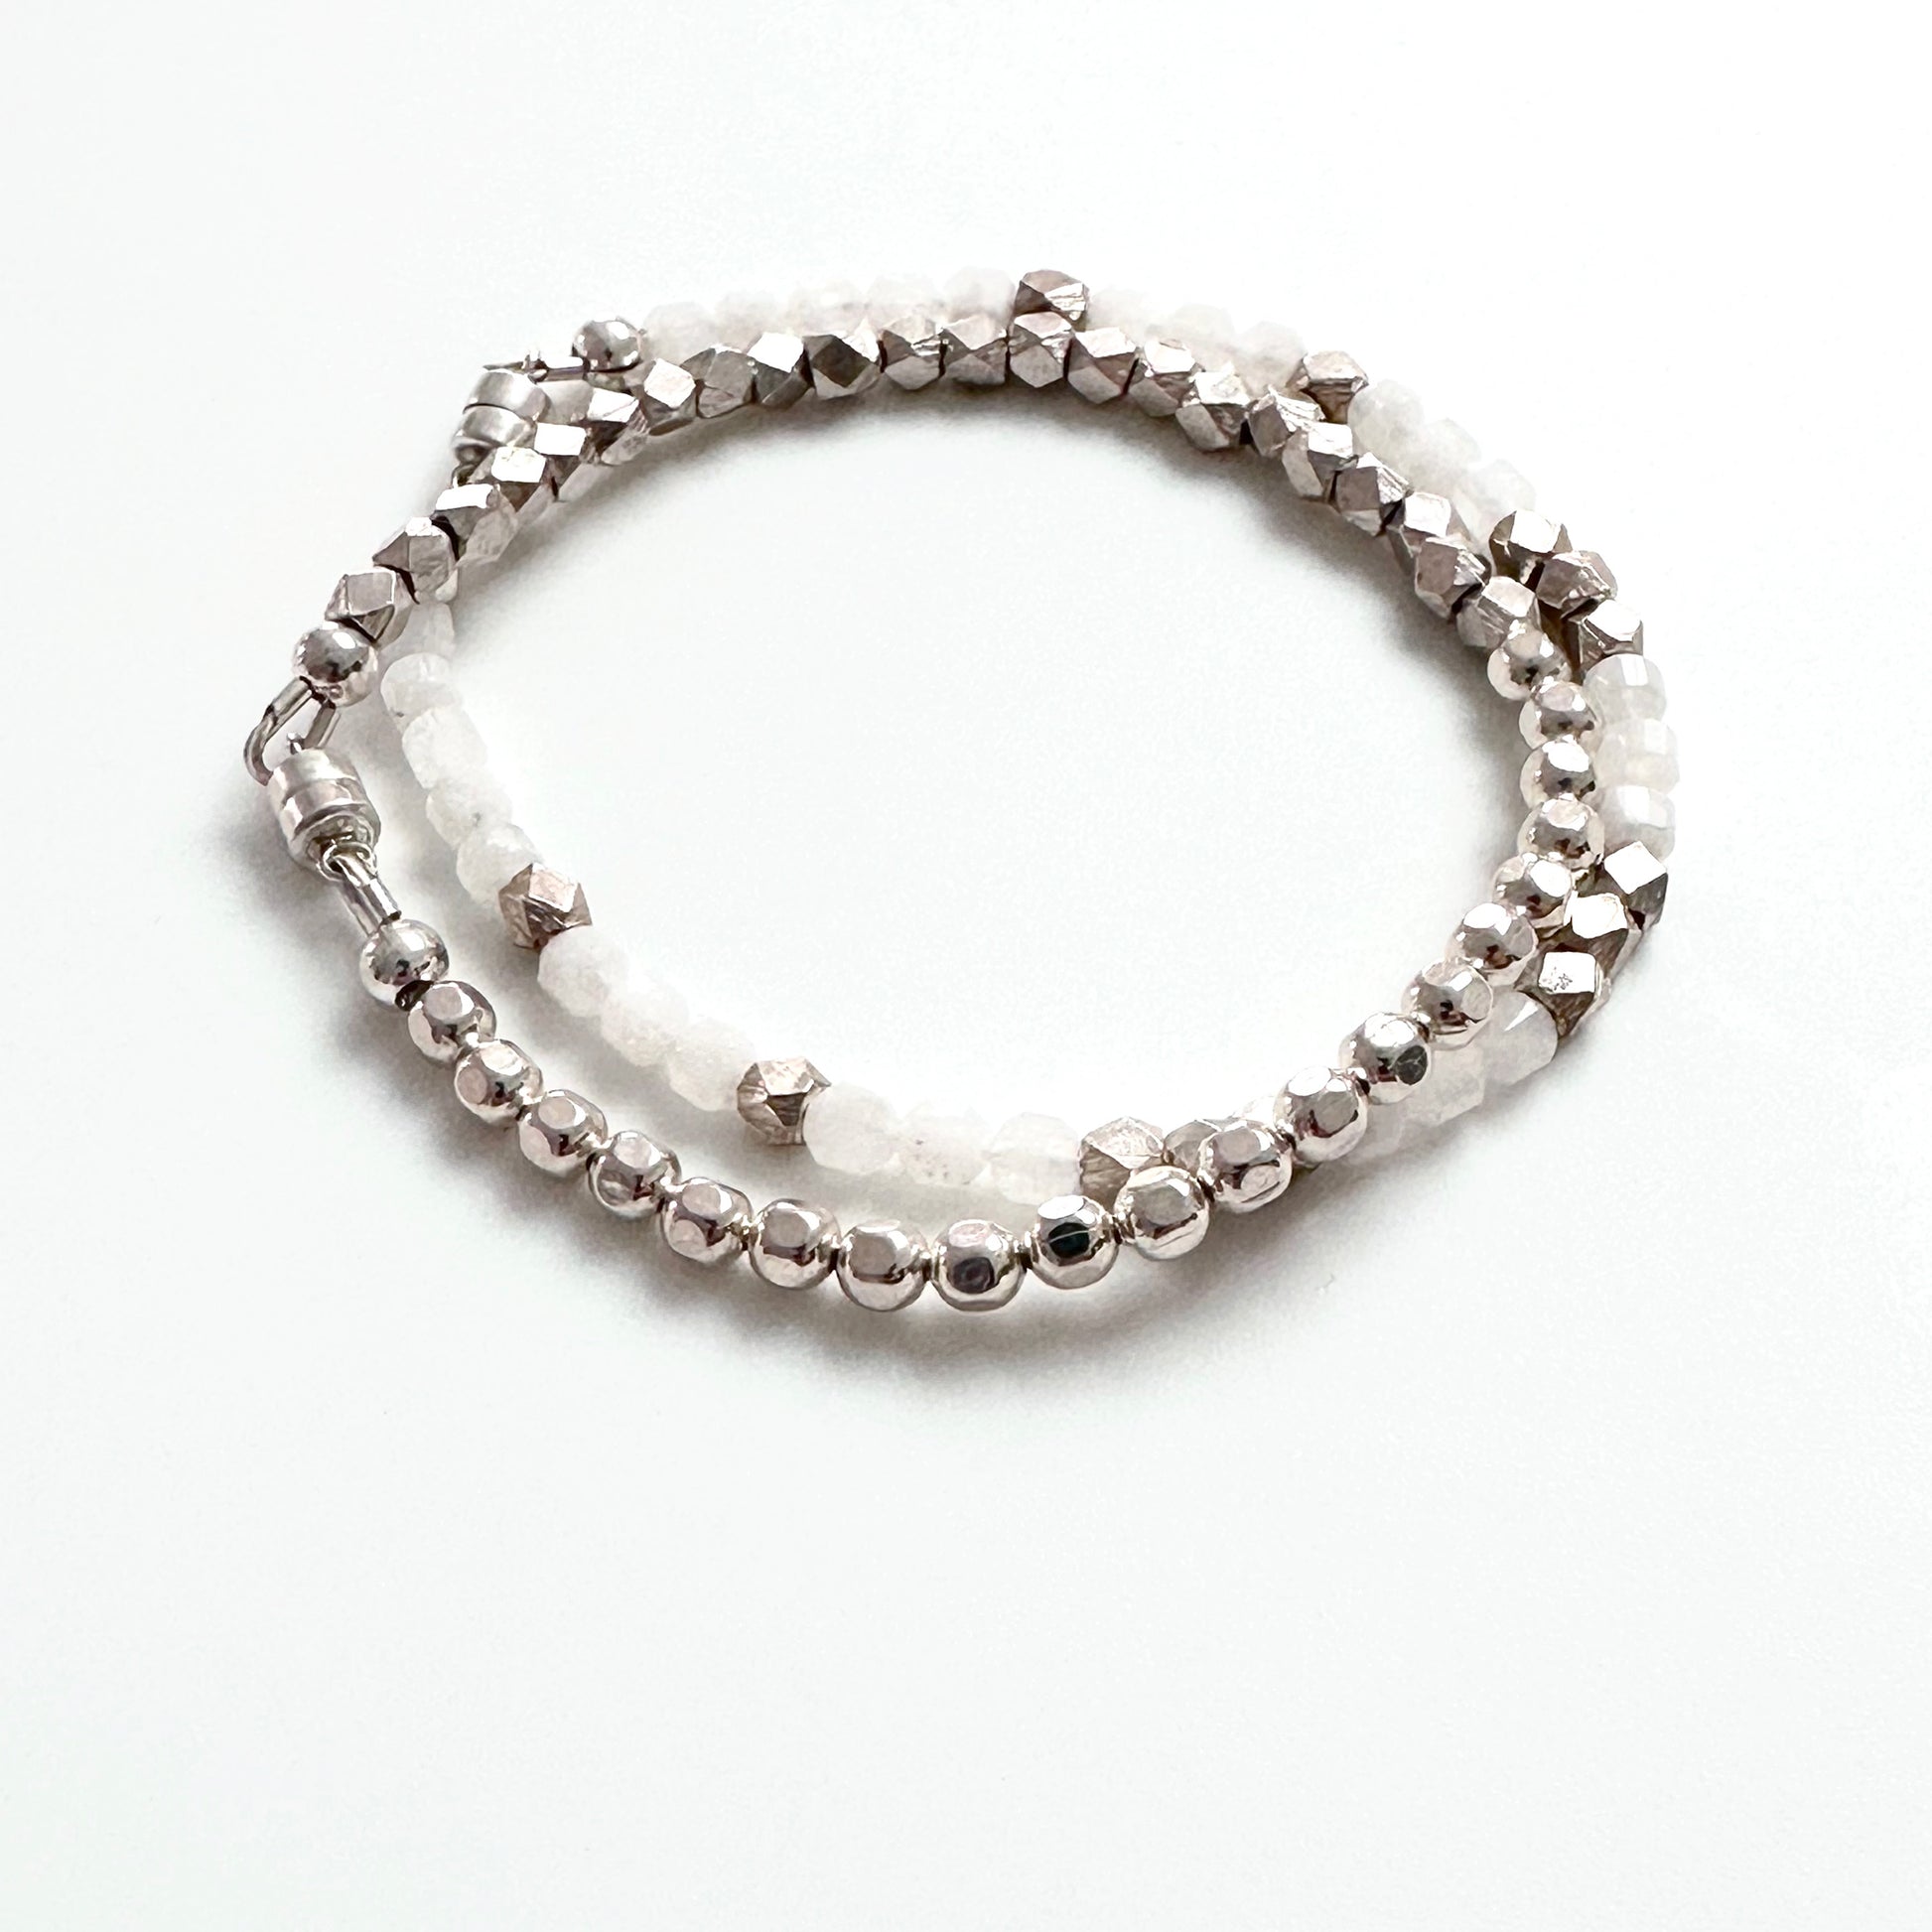 beaded sterling silver bracelet shown with white and silver beaded bracelet